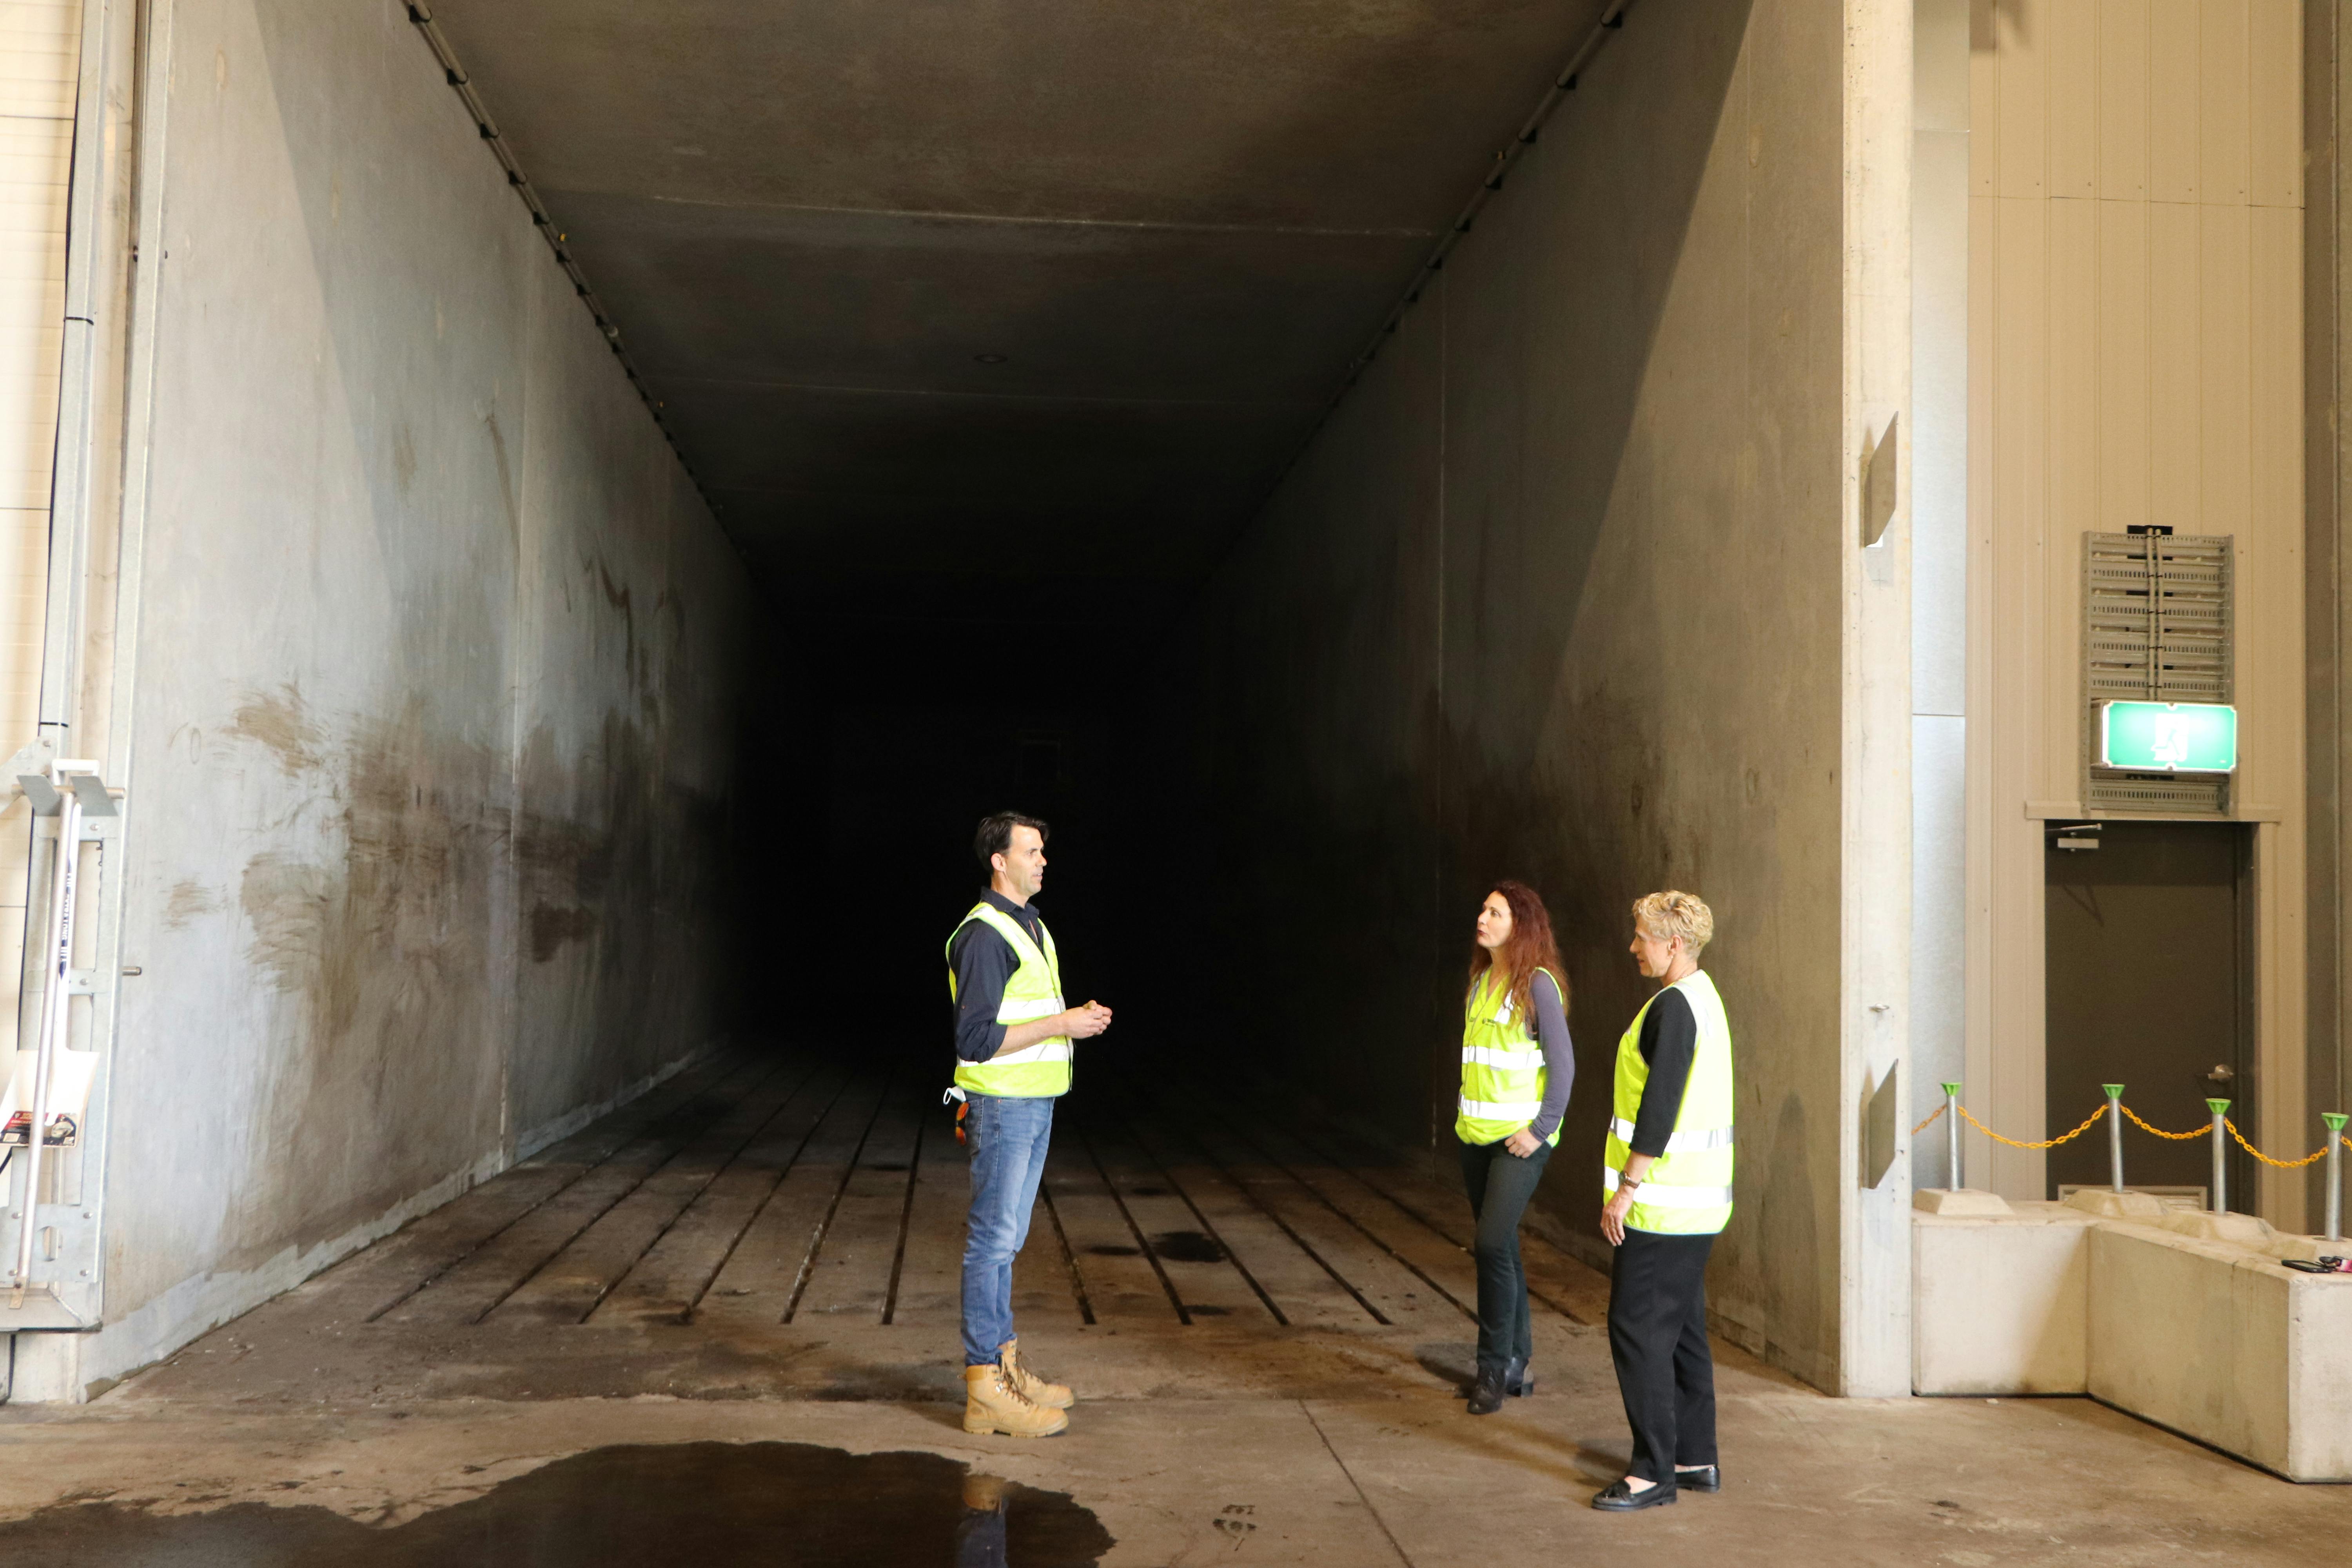 Soilco Operations Manager Mark Emery explains the organic waste drying process to Tweed Mayor Chris Cherry and Director of Sustainable Communities and Environment Tracey Stinson.